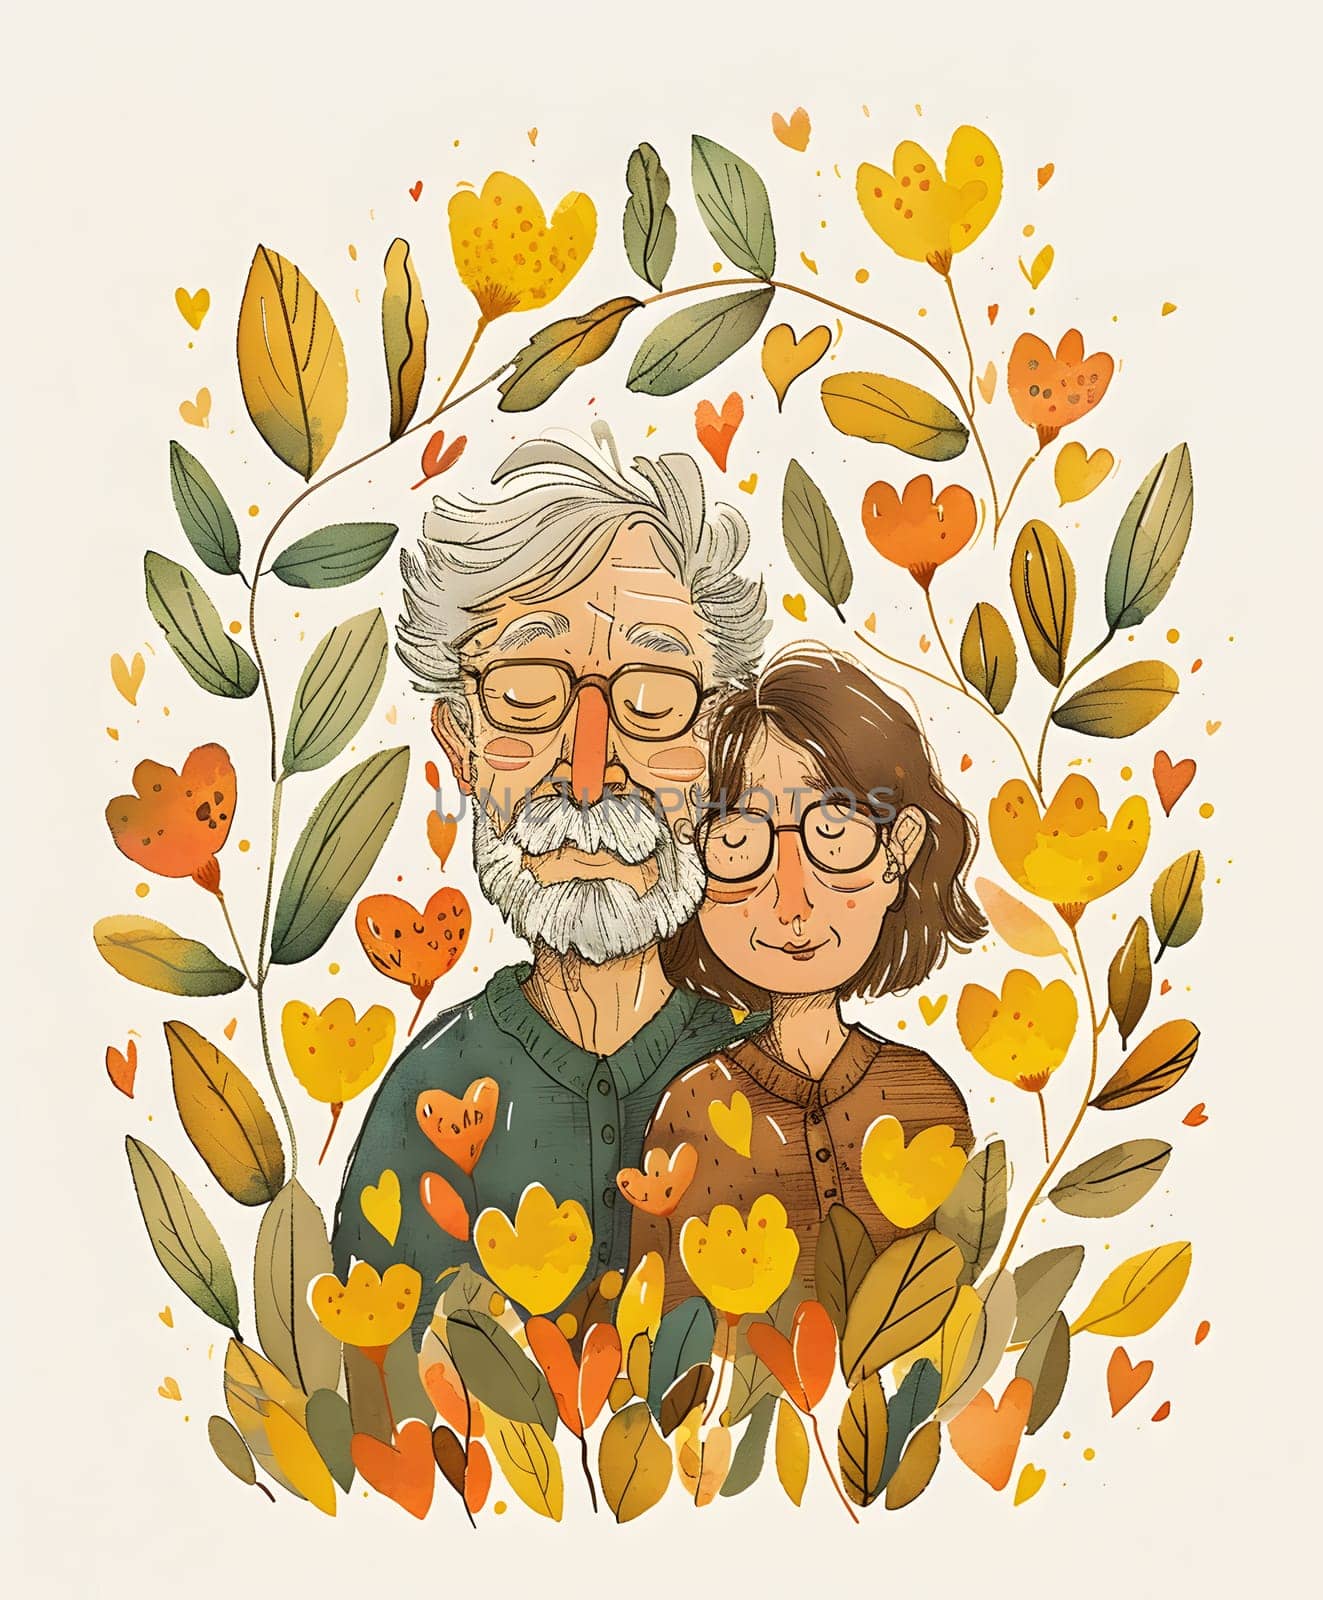 an elderly man and a young girl are surrounded by flowers and leaves by Nadtochiy